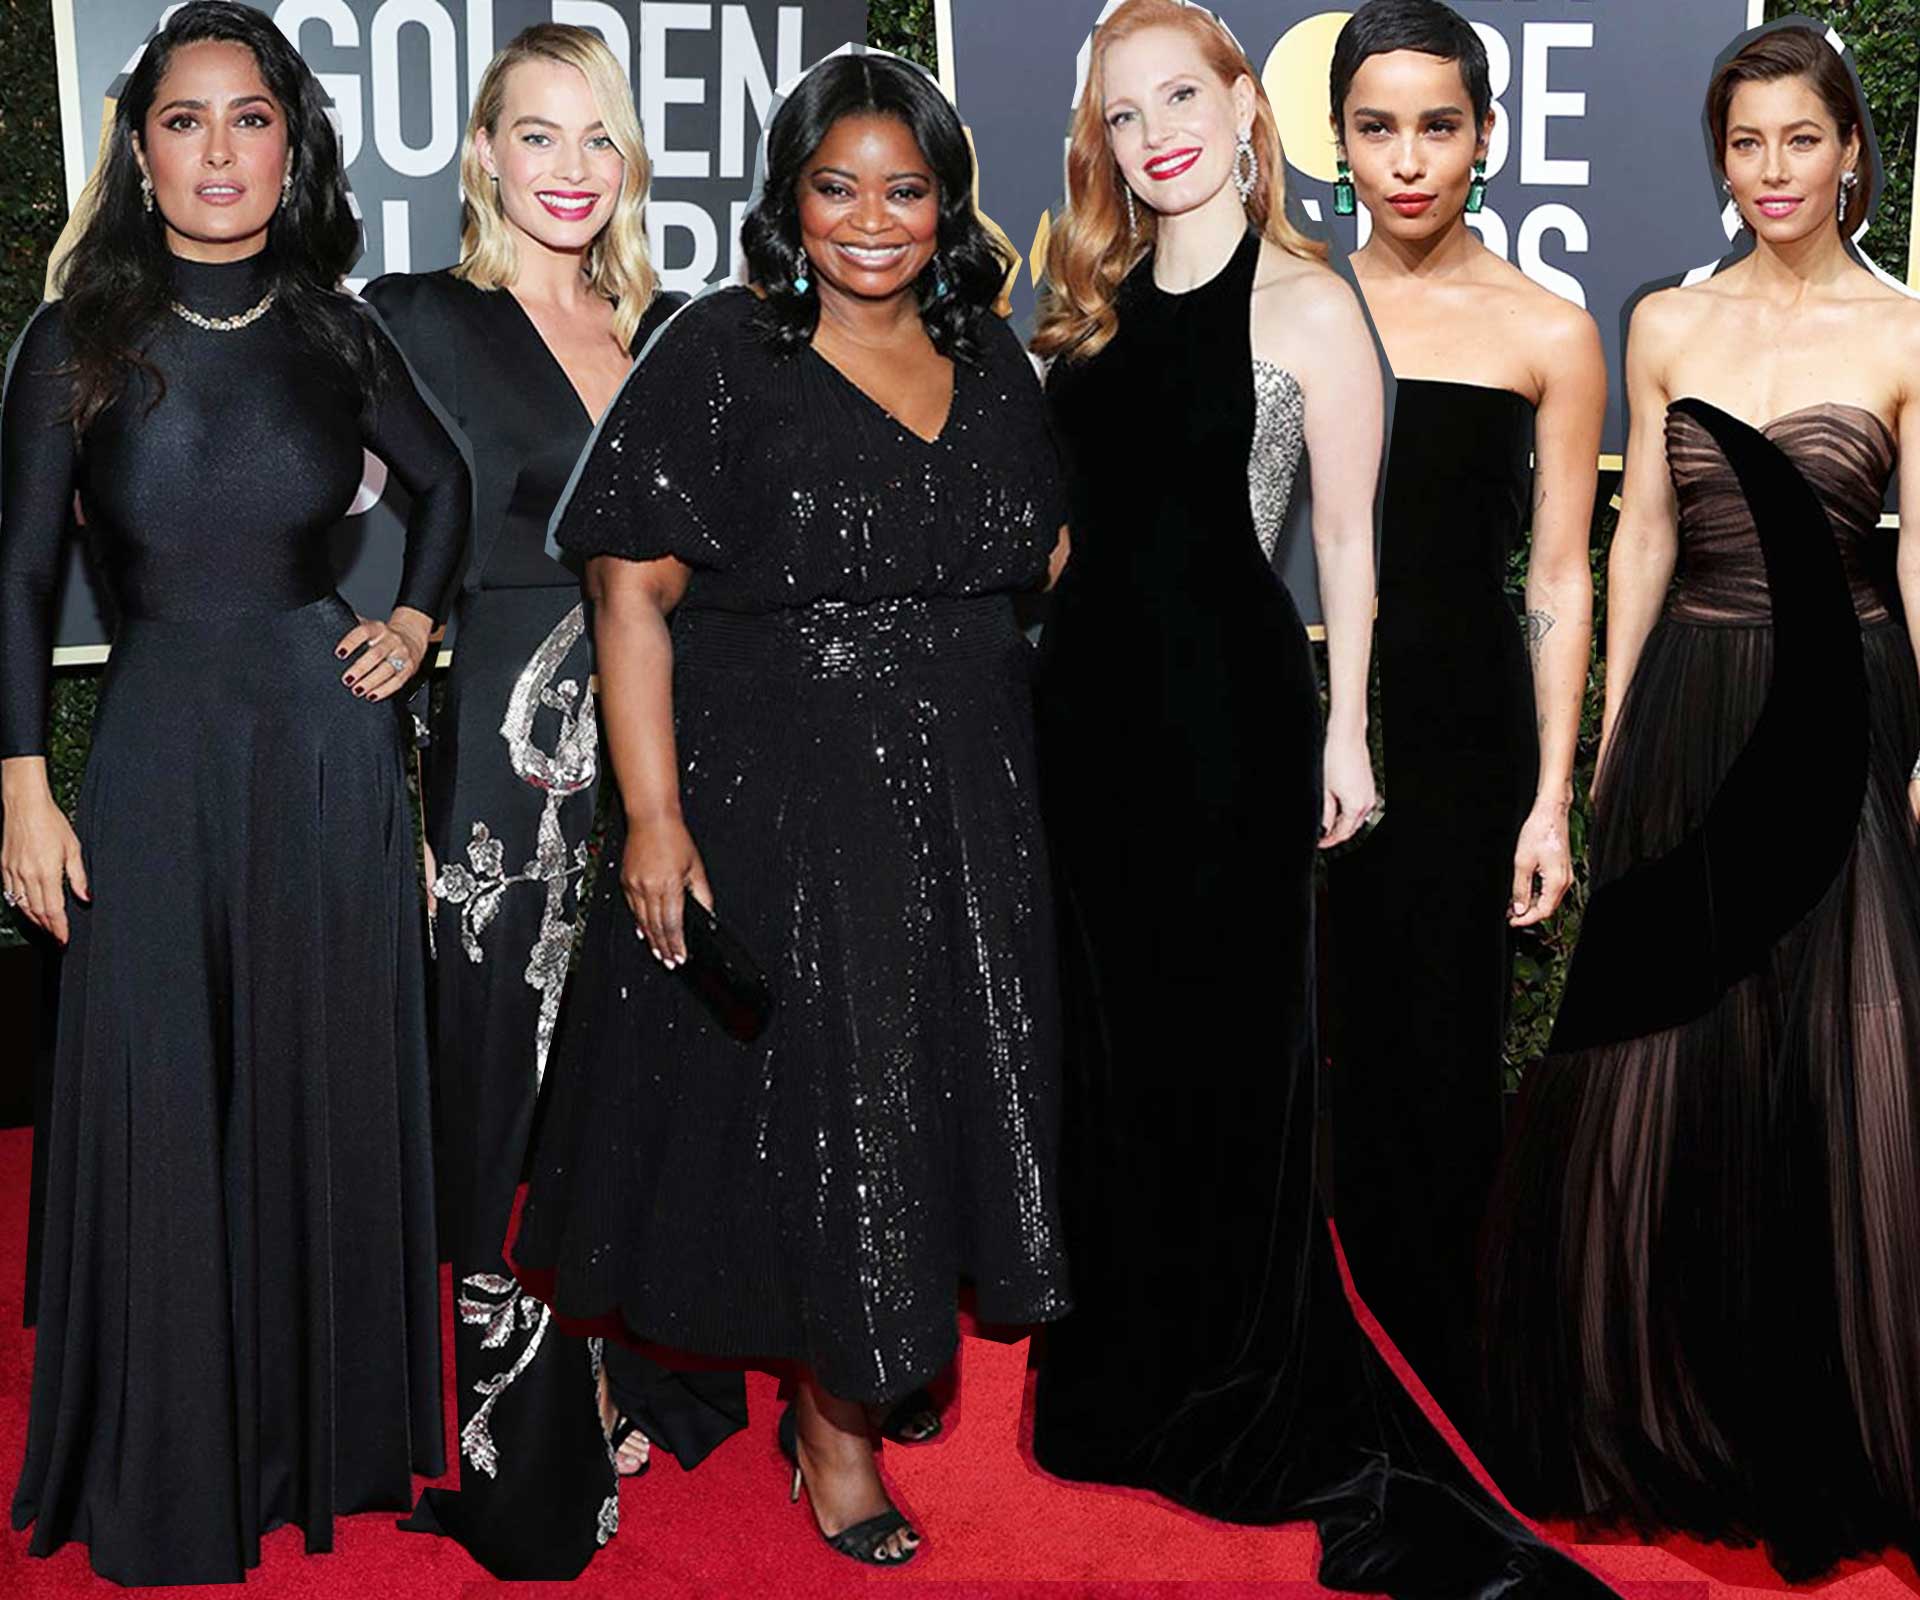 Time’s Up: Why the stars are wearing black to the Golden Globes